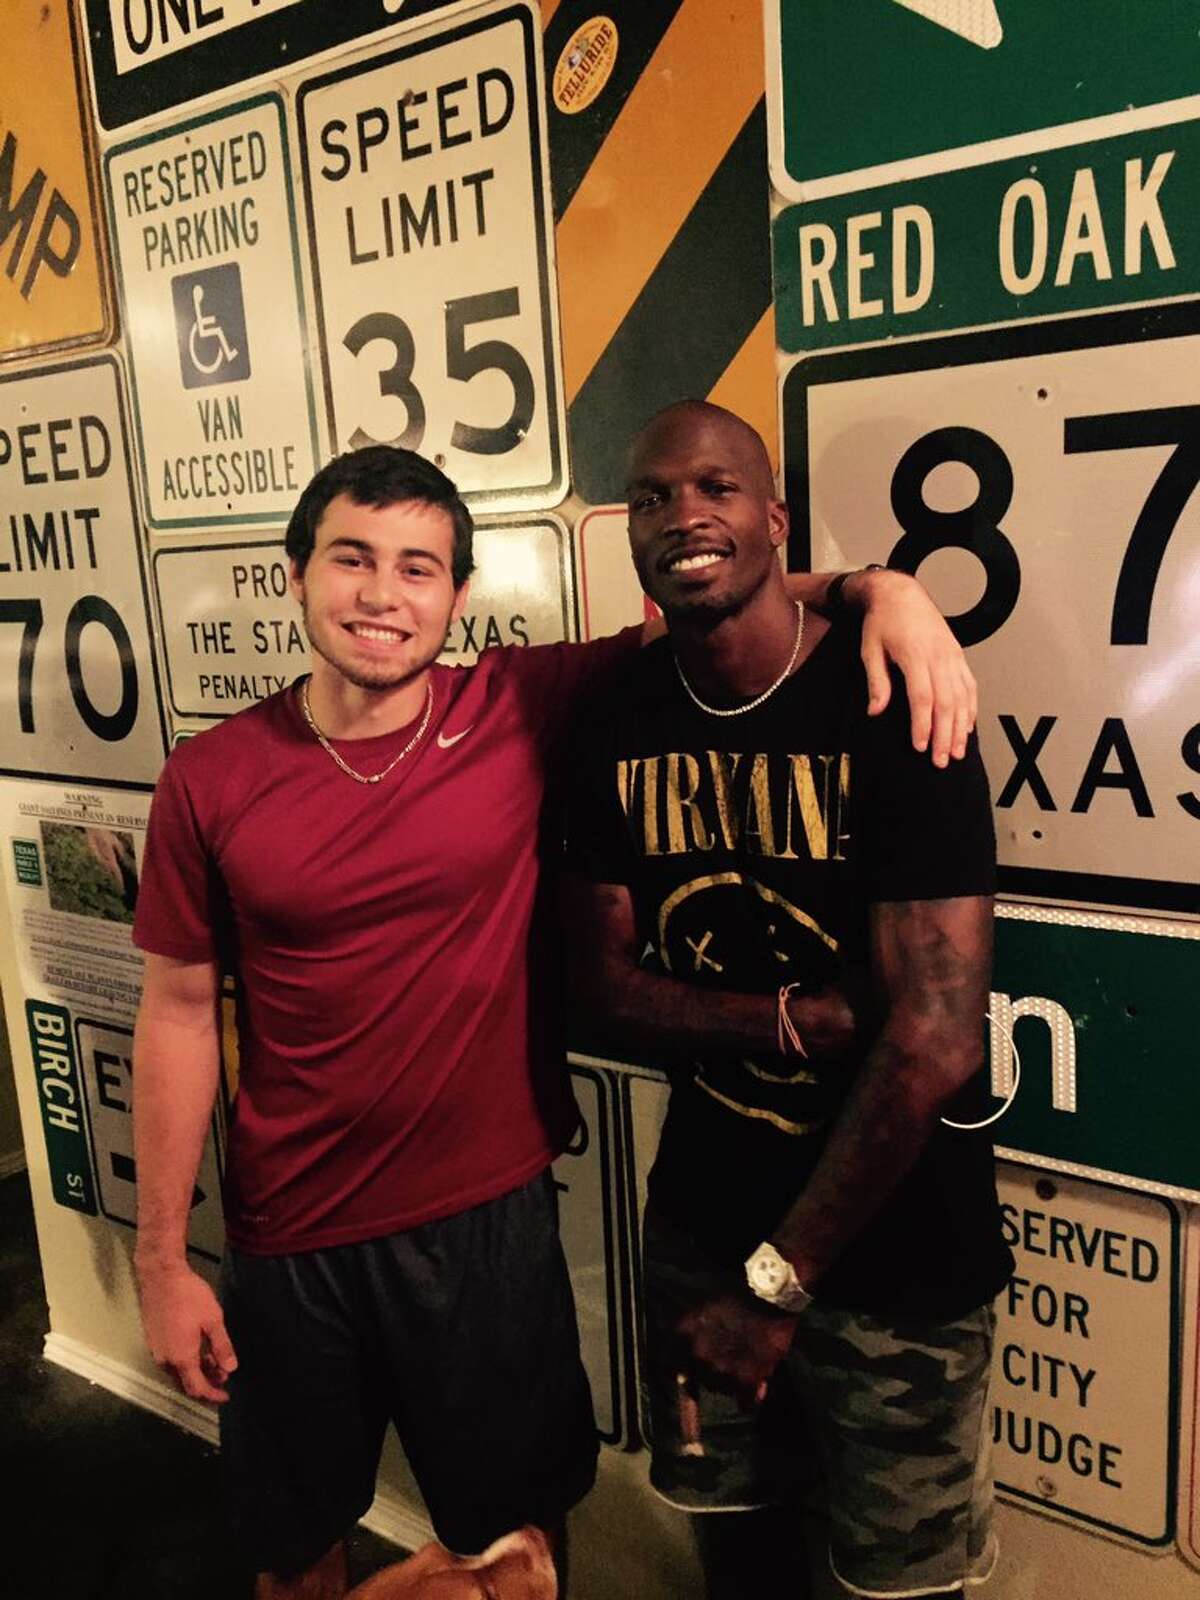 On Sunday, former NFL star Chad Johnson gamed with a few members of Texas State University's football team for 10 hours. Johnson was in the area for an autograph event. 